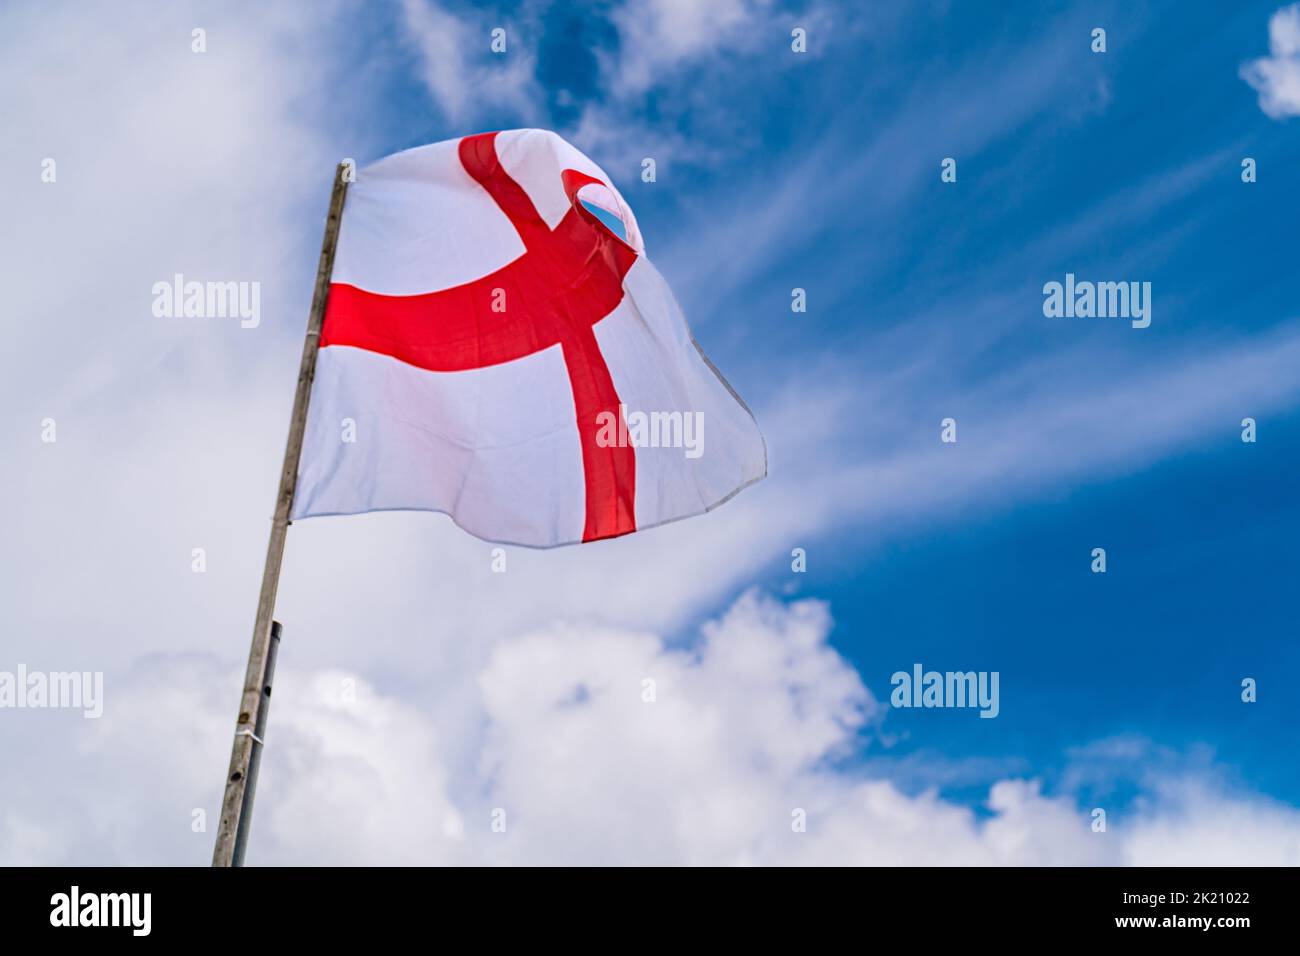 Flag of England on beautiful blue cloudy sky background. White and red flag blowing on the wind. Stock Photo